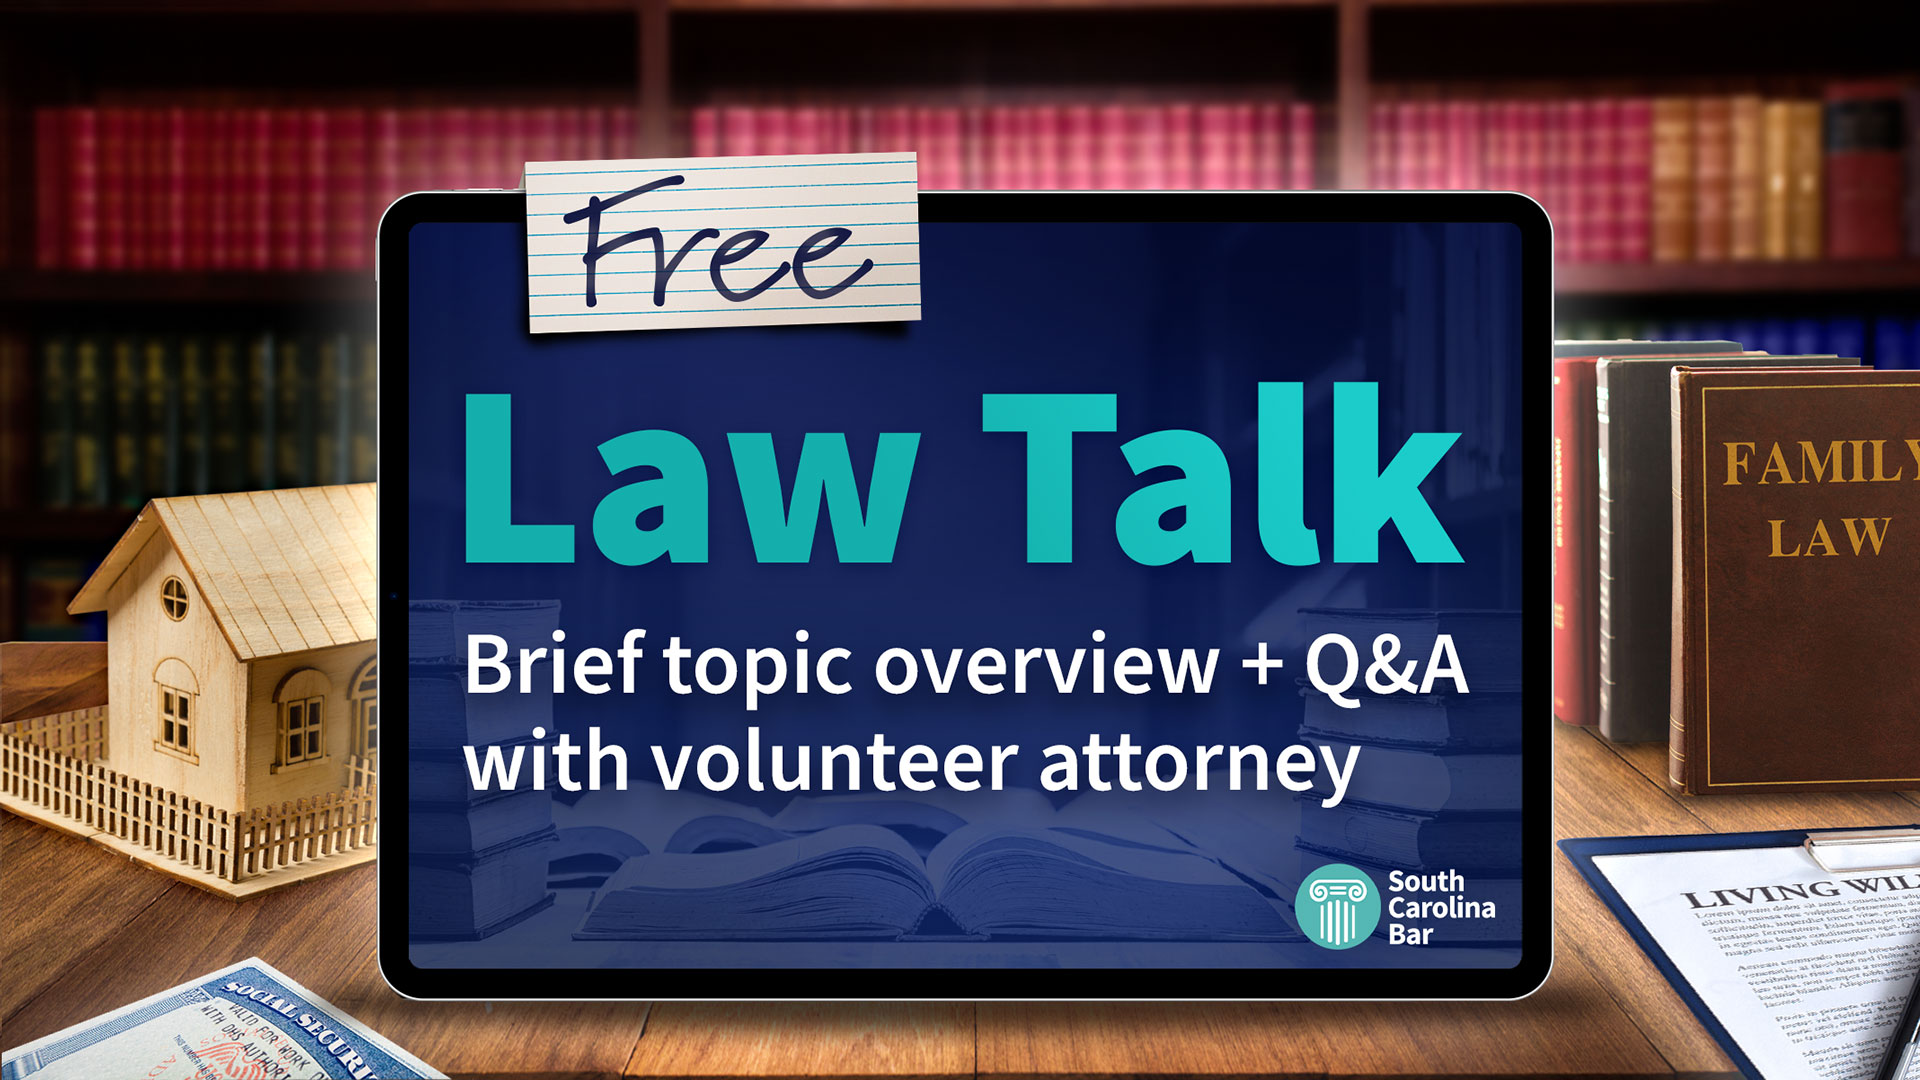 free law talk with Q&A session by members of the South Carolina Bar